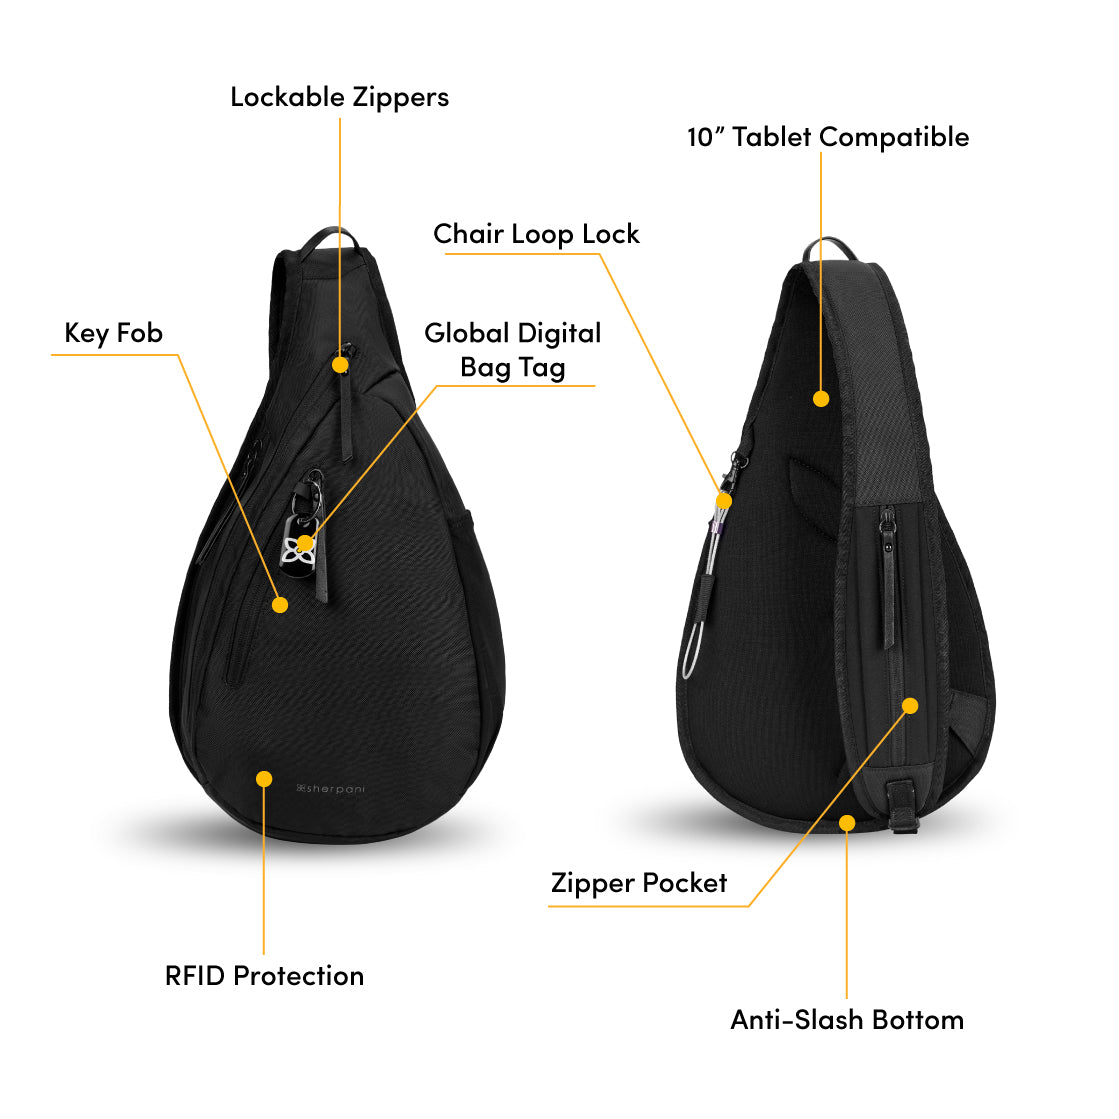 Graphic showcasing the features of Sherpani’s Anti Theft bag, the Esprit AT in Carbon. There is a front and a back view of the bag, red circles highlight the following features: Lockable Zippers, Key Fob, Chair Loop Lock, 1” Tablet Compatible, Zipper Pocket, Anti-Slash Bottom, RFID Protection. 